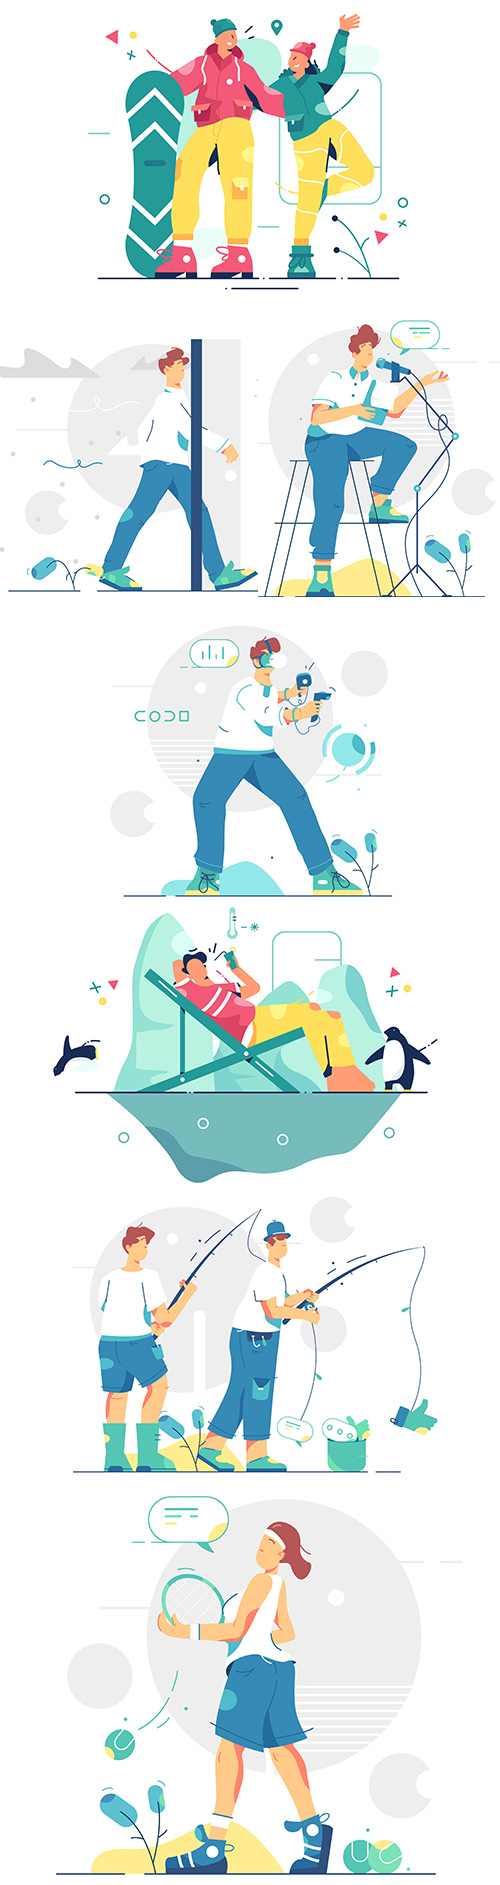 Man and woman entertainment and outdoor walking flat design